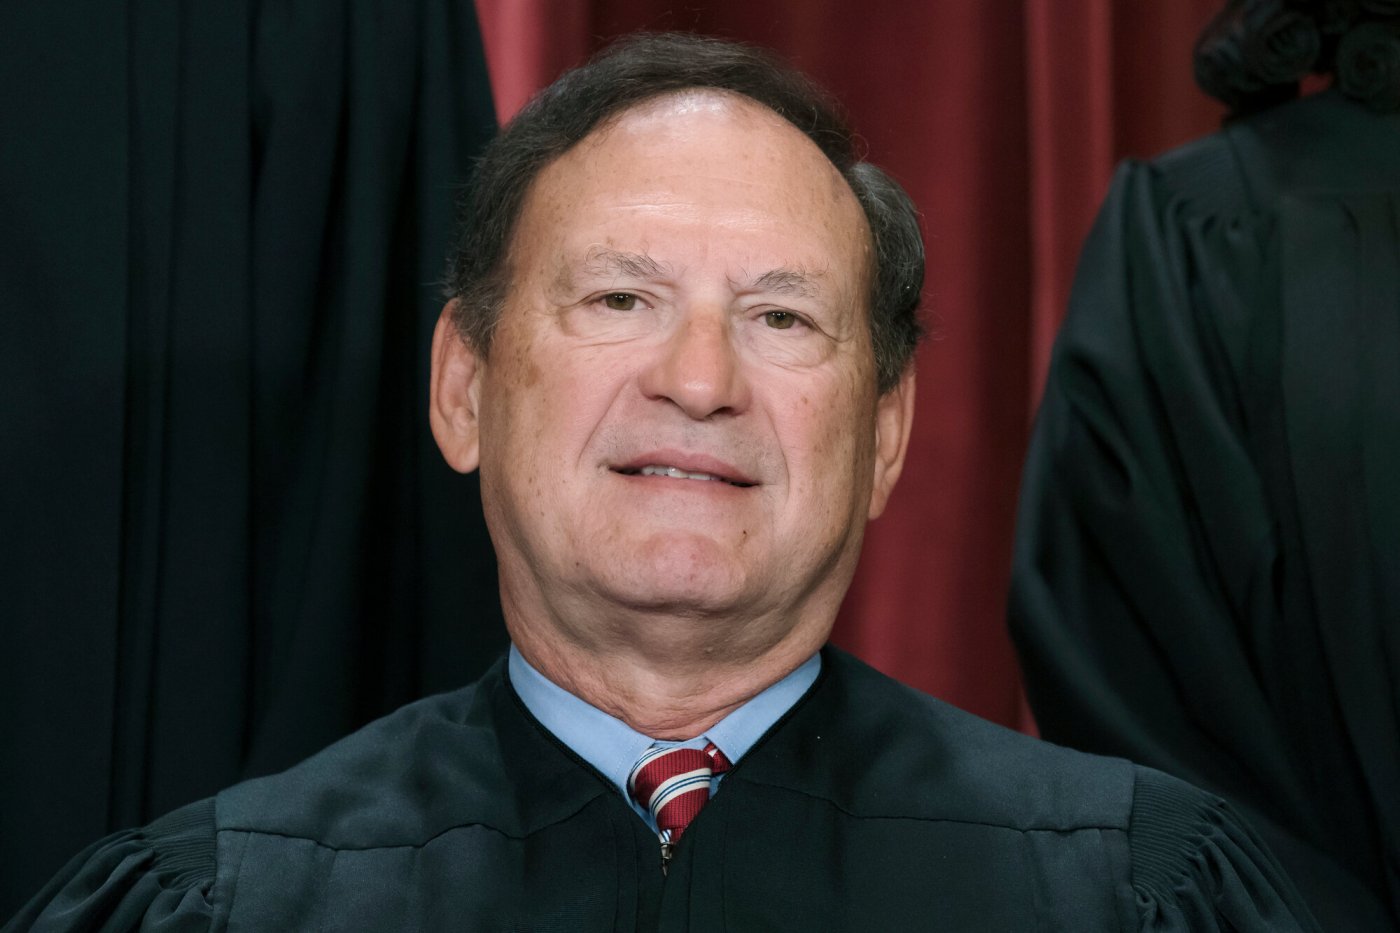 report:-upside-down-us-flag-flew-at-justice-alito’s-home-in-2021